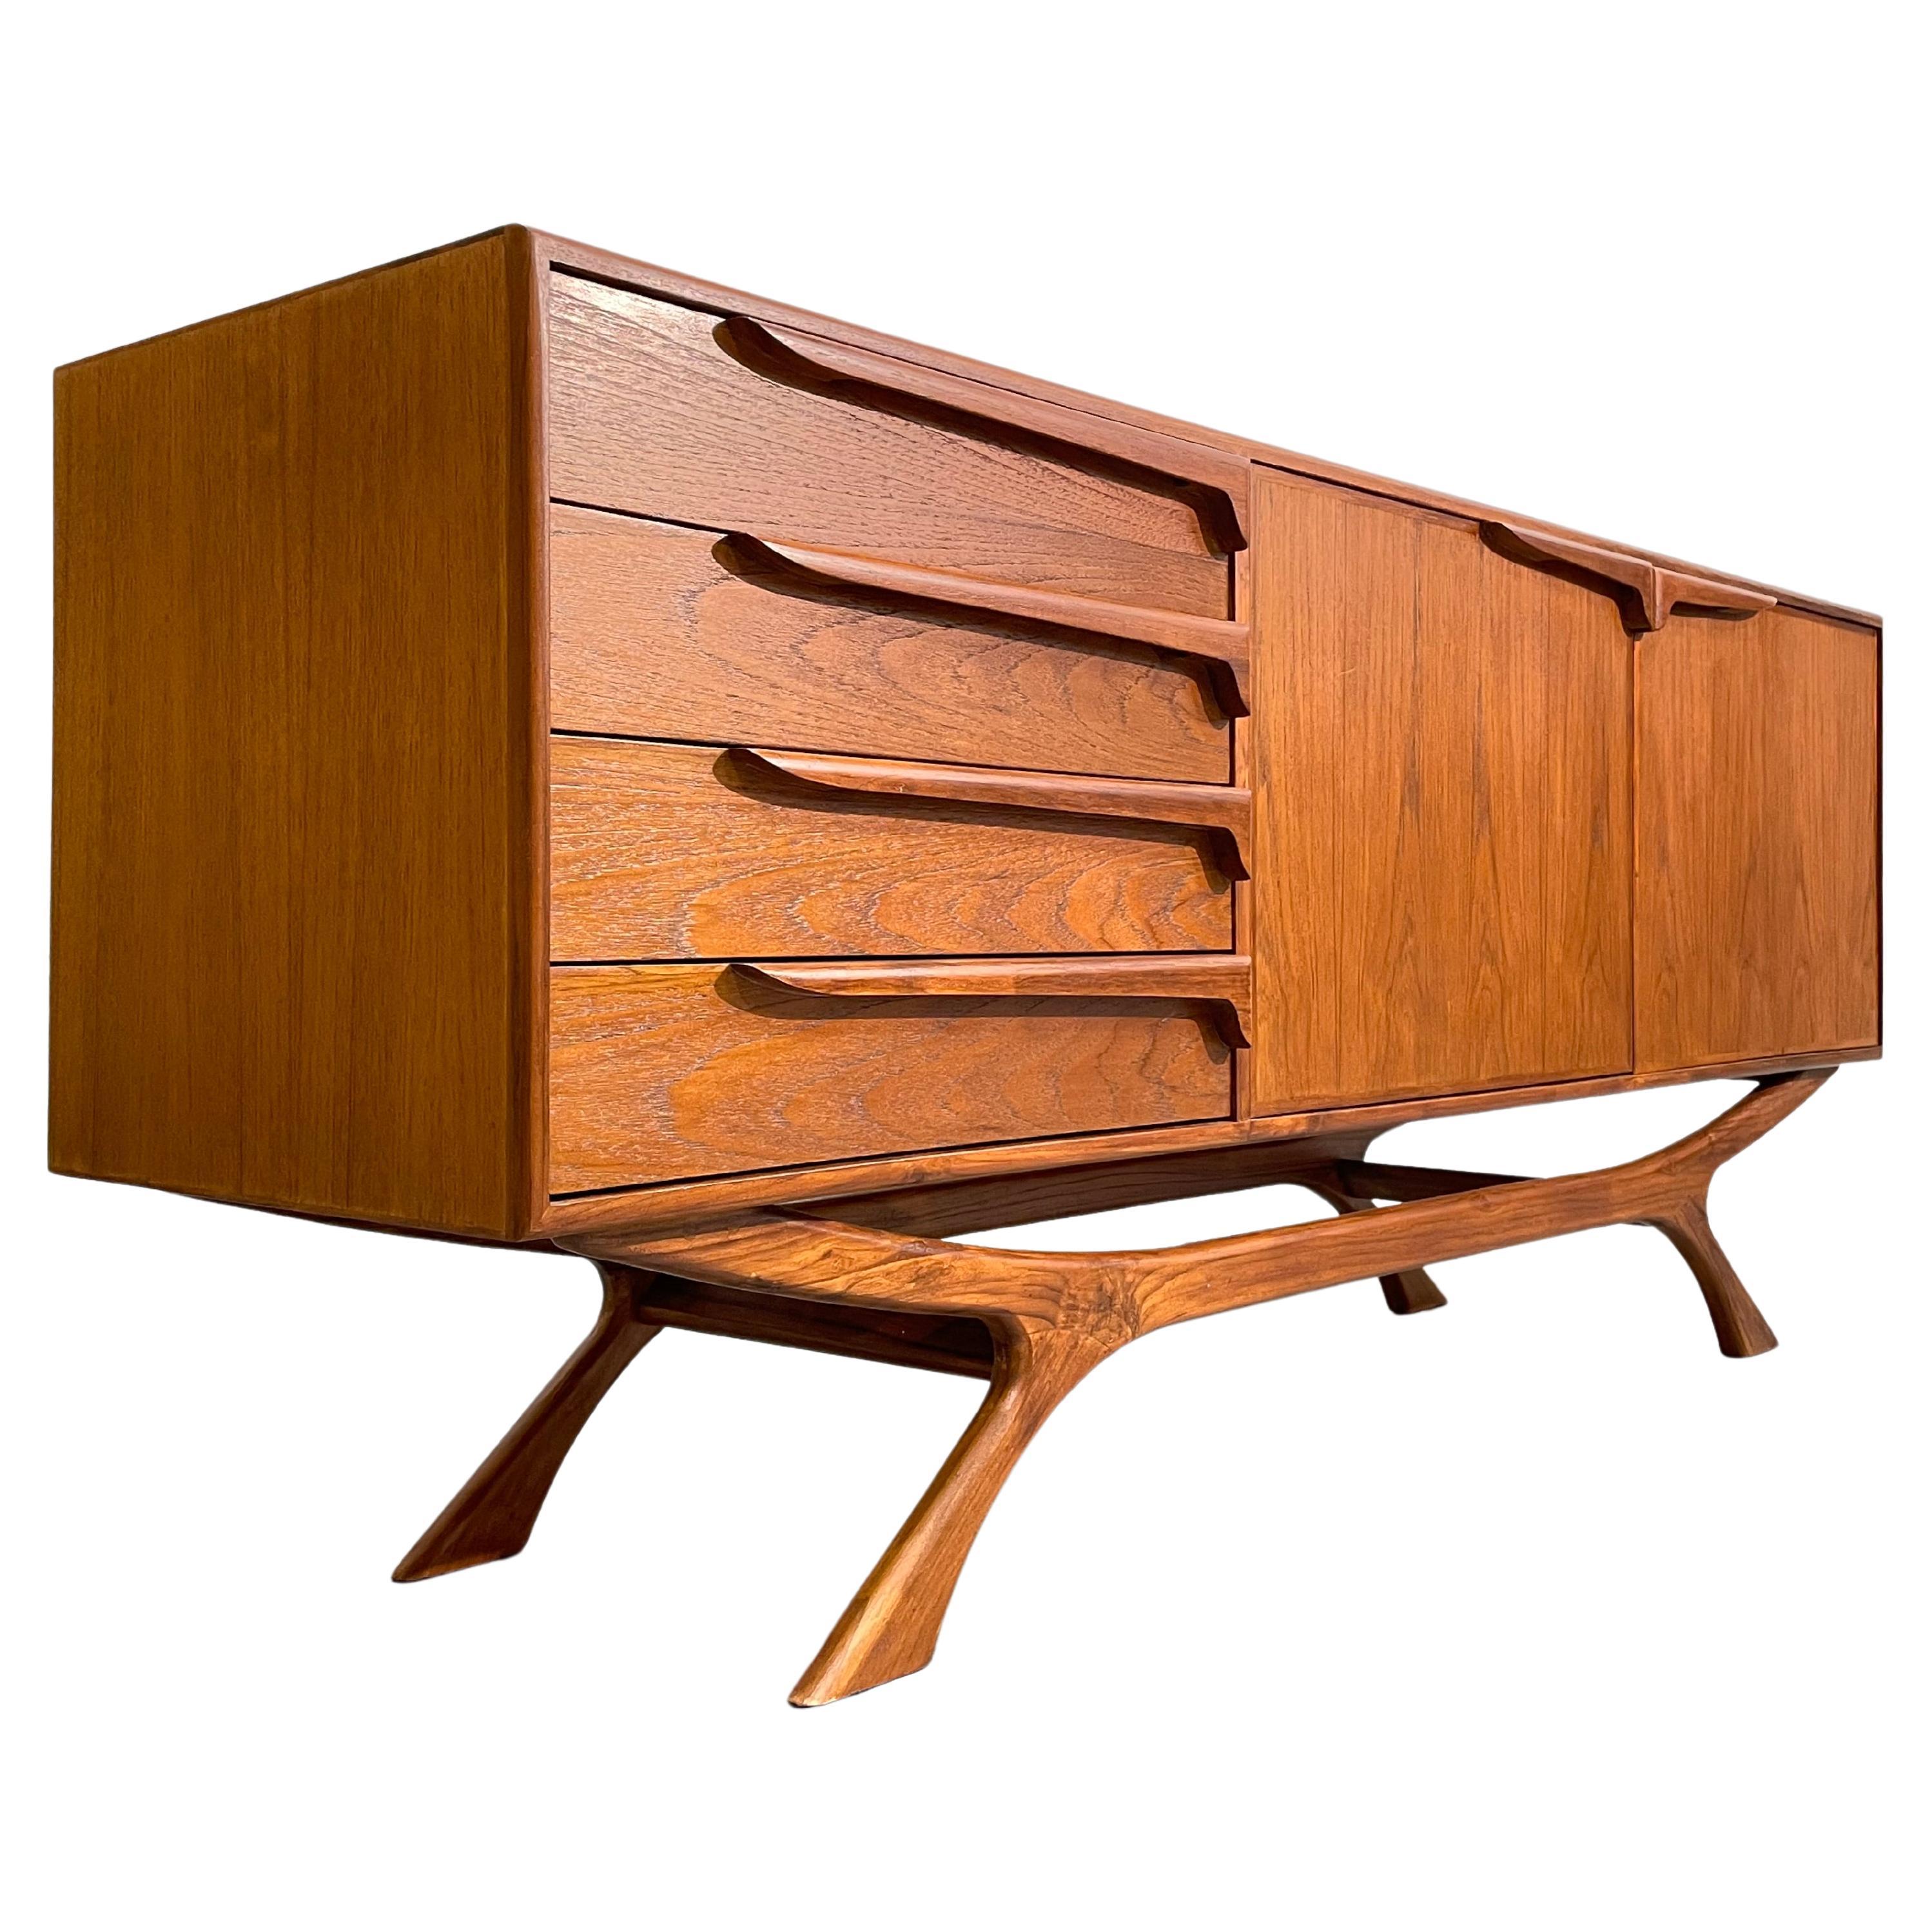 MONUMENTAL Mid Century Modern styled Teak CREDENZA media stand In New Condition For Sale In Weehawken, NJ